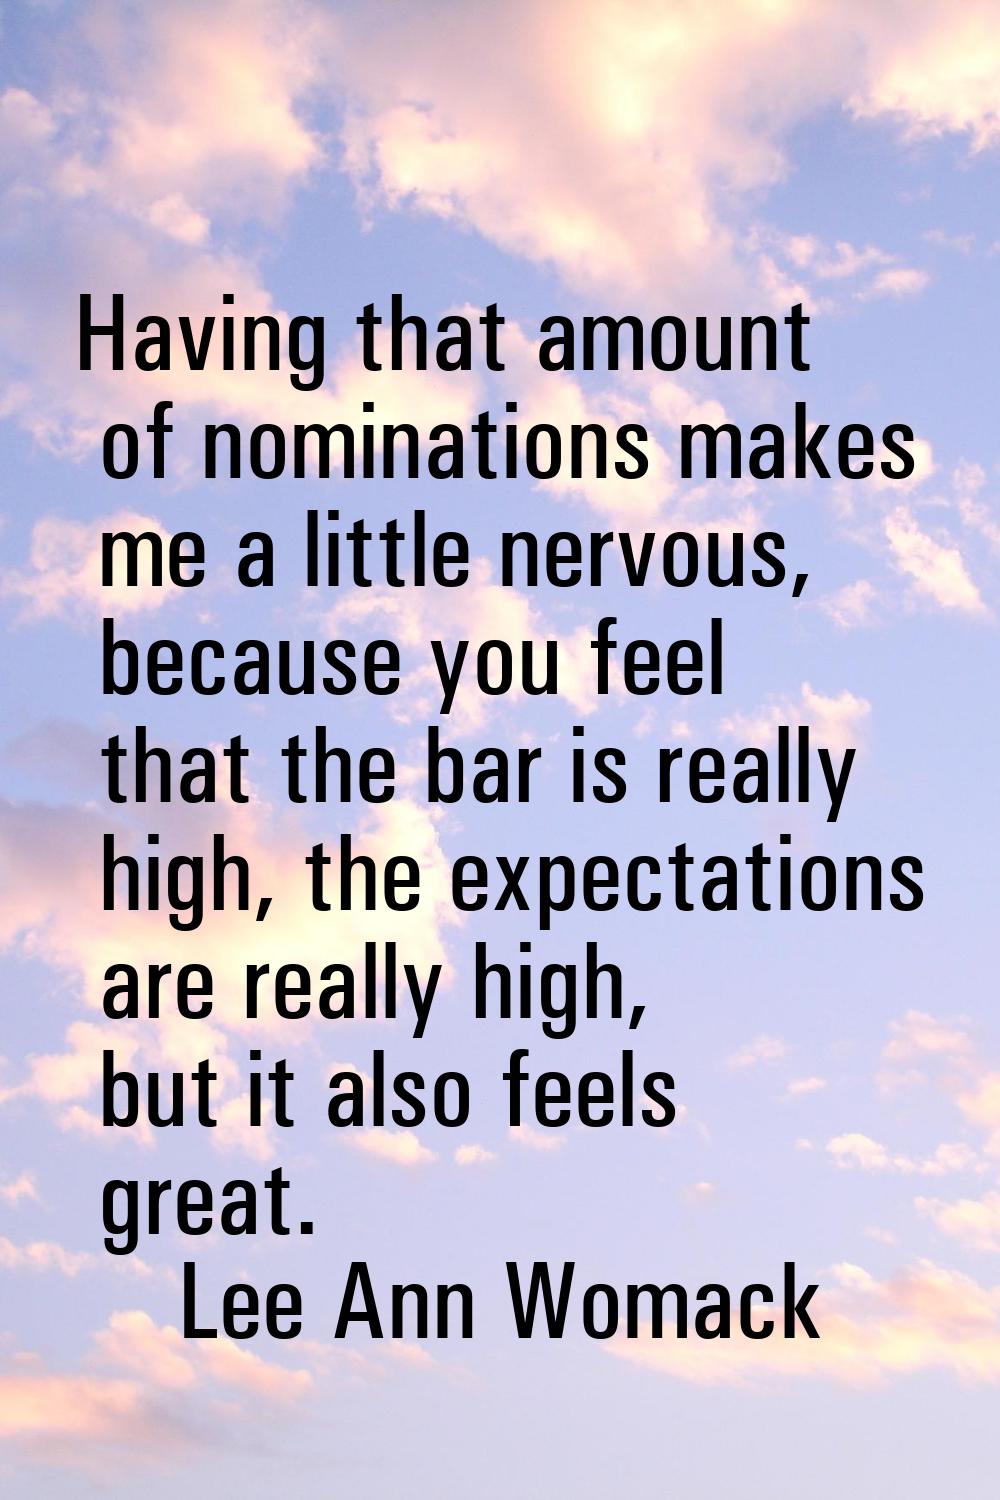 Having that amount of nominations makes me a little nervous, because you feel that the bar is reall